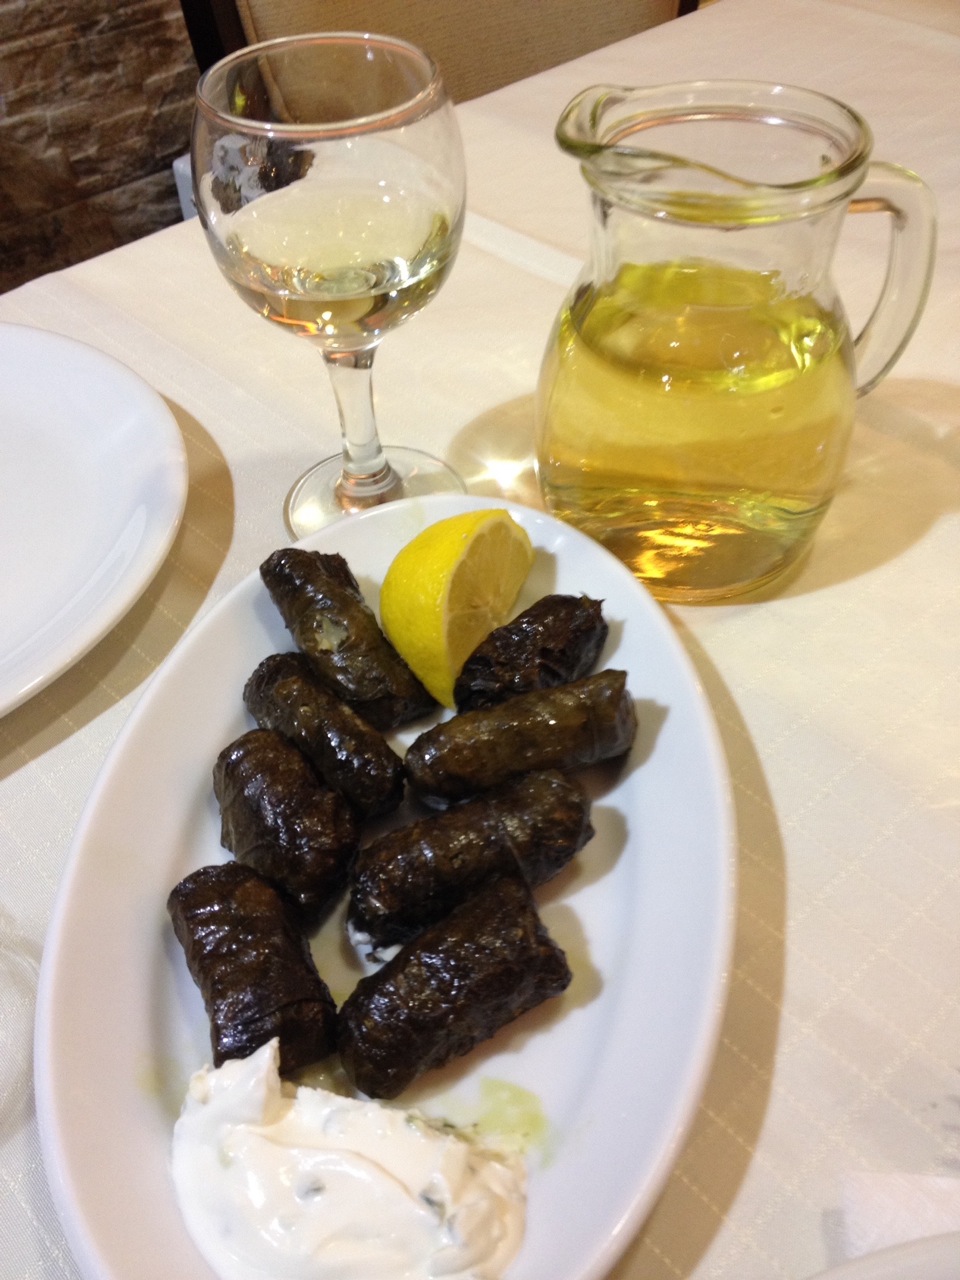 Local vine and dolmades